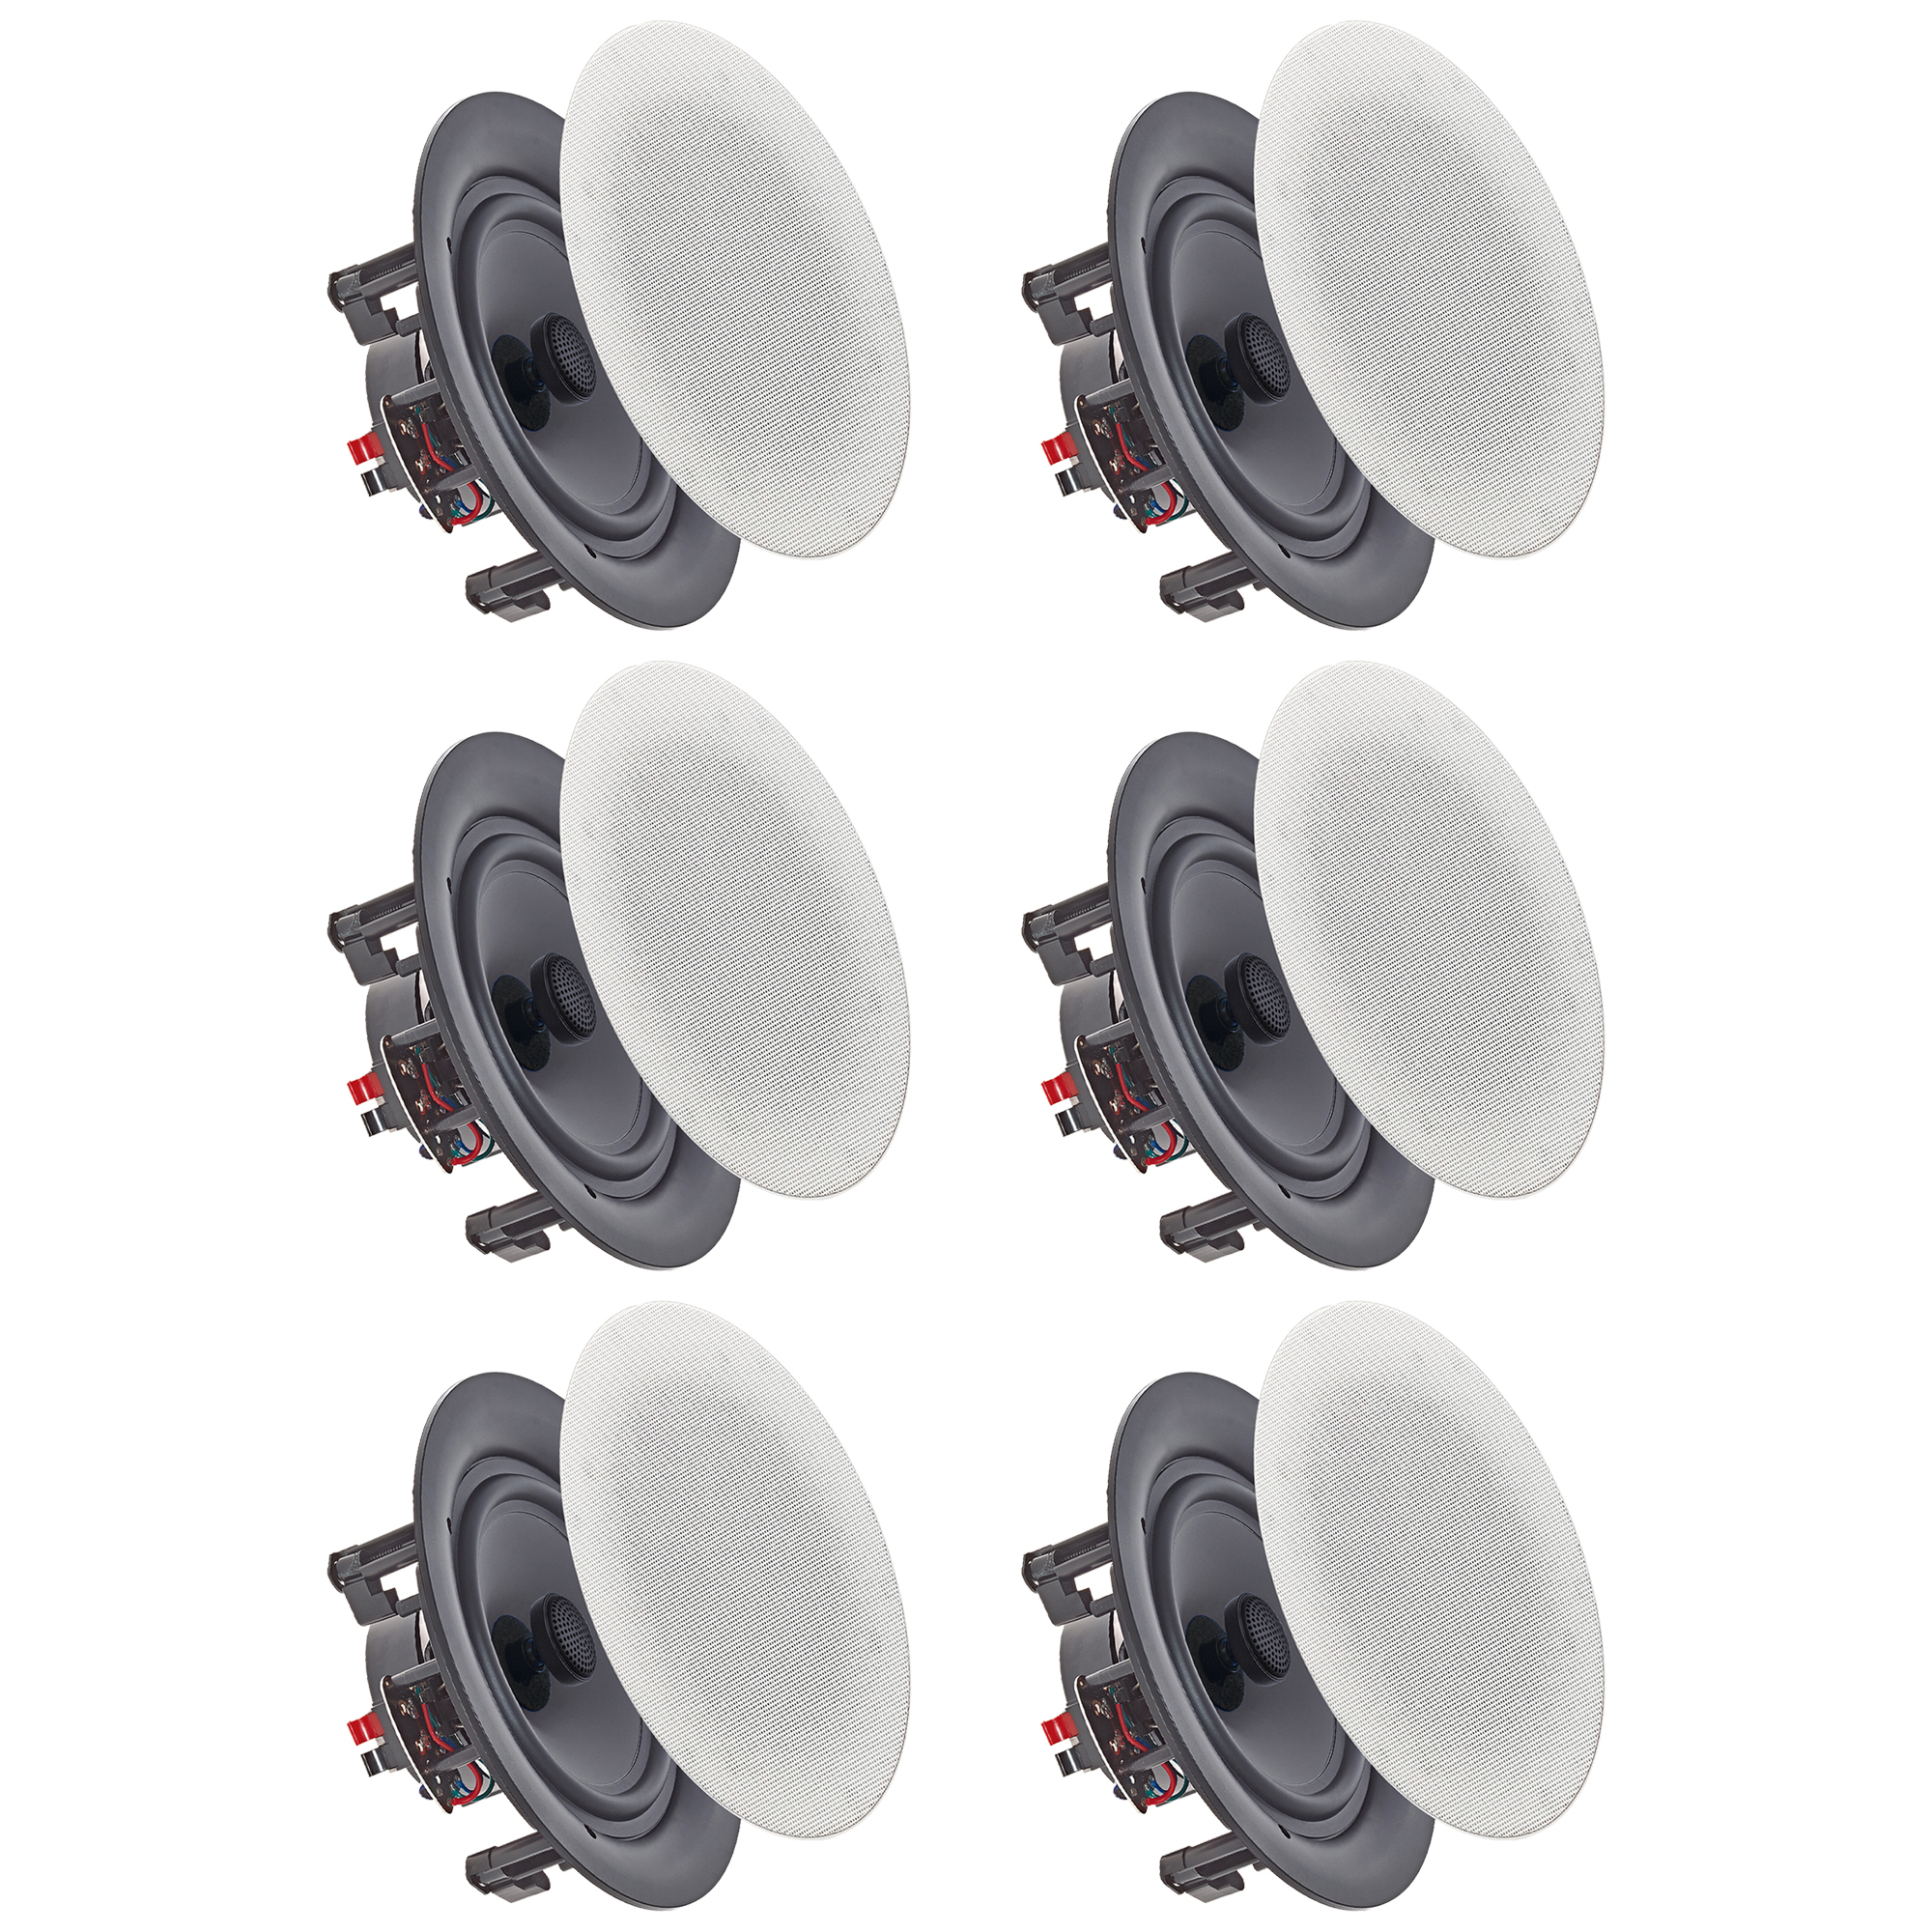 Set Of (6) Vaiyer 5.25 Inch 8 Ohm 175 Watts Frameless Speakers, Flush Mount In-Wall In-Ceiling 2-Way Mid Bass Woofer Speakers